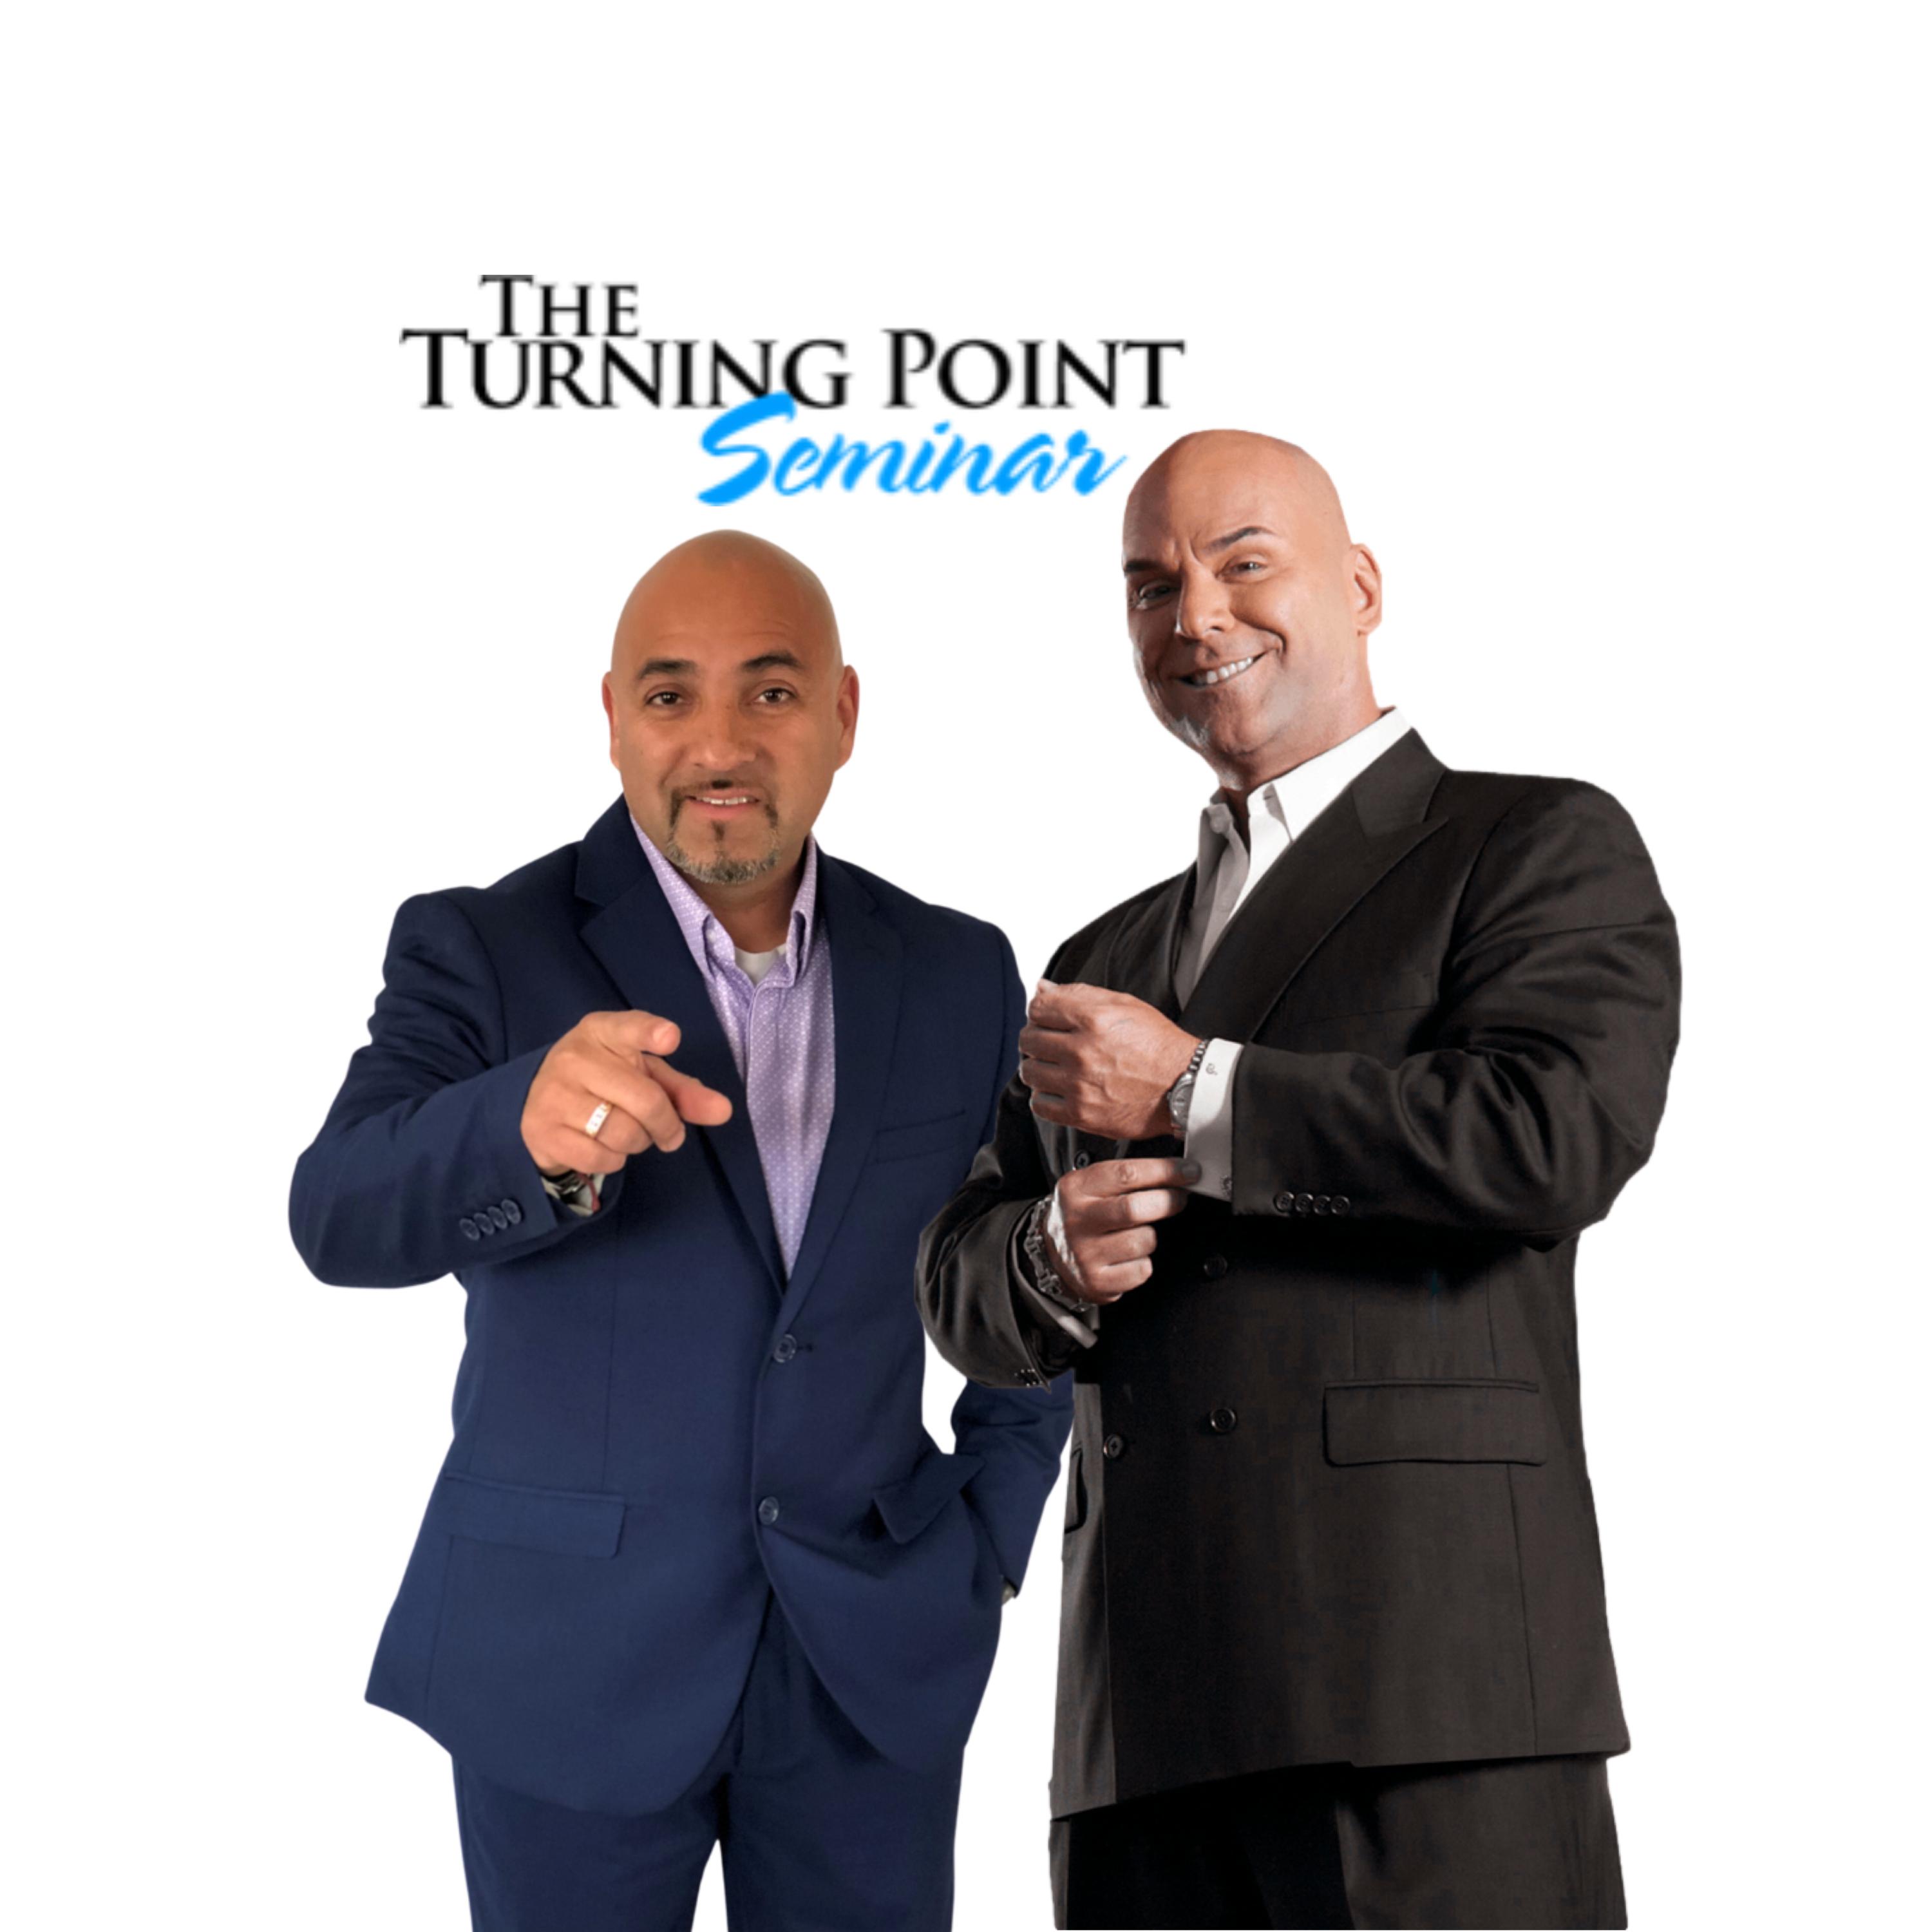 Business Owners Invited to Transform Their Lives at the Turning Point™ Seminar in Las Vegas